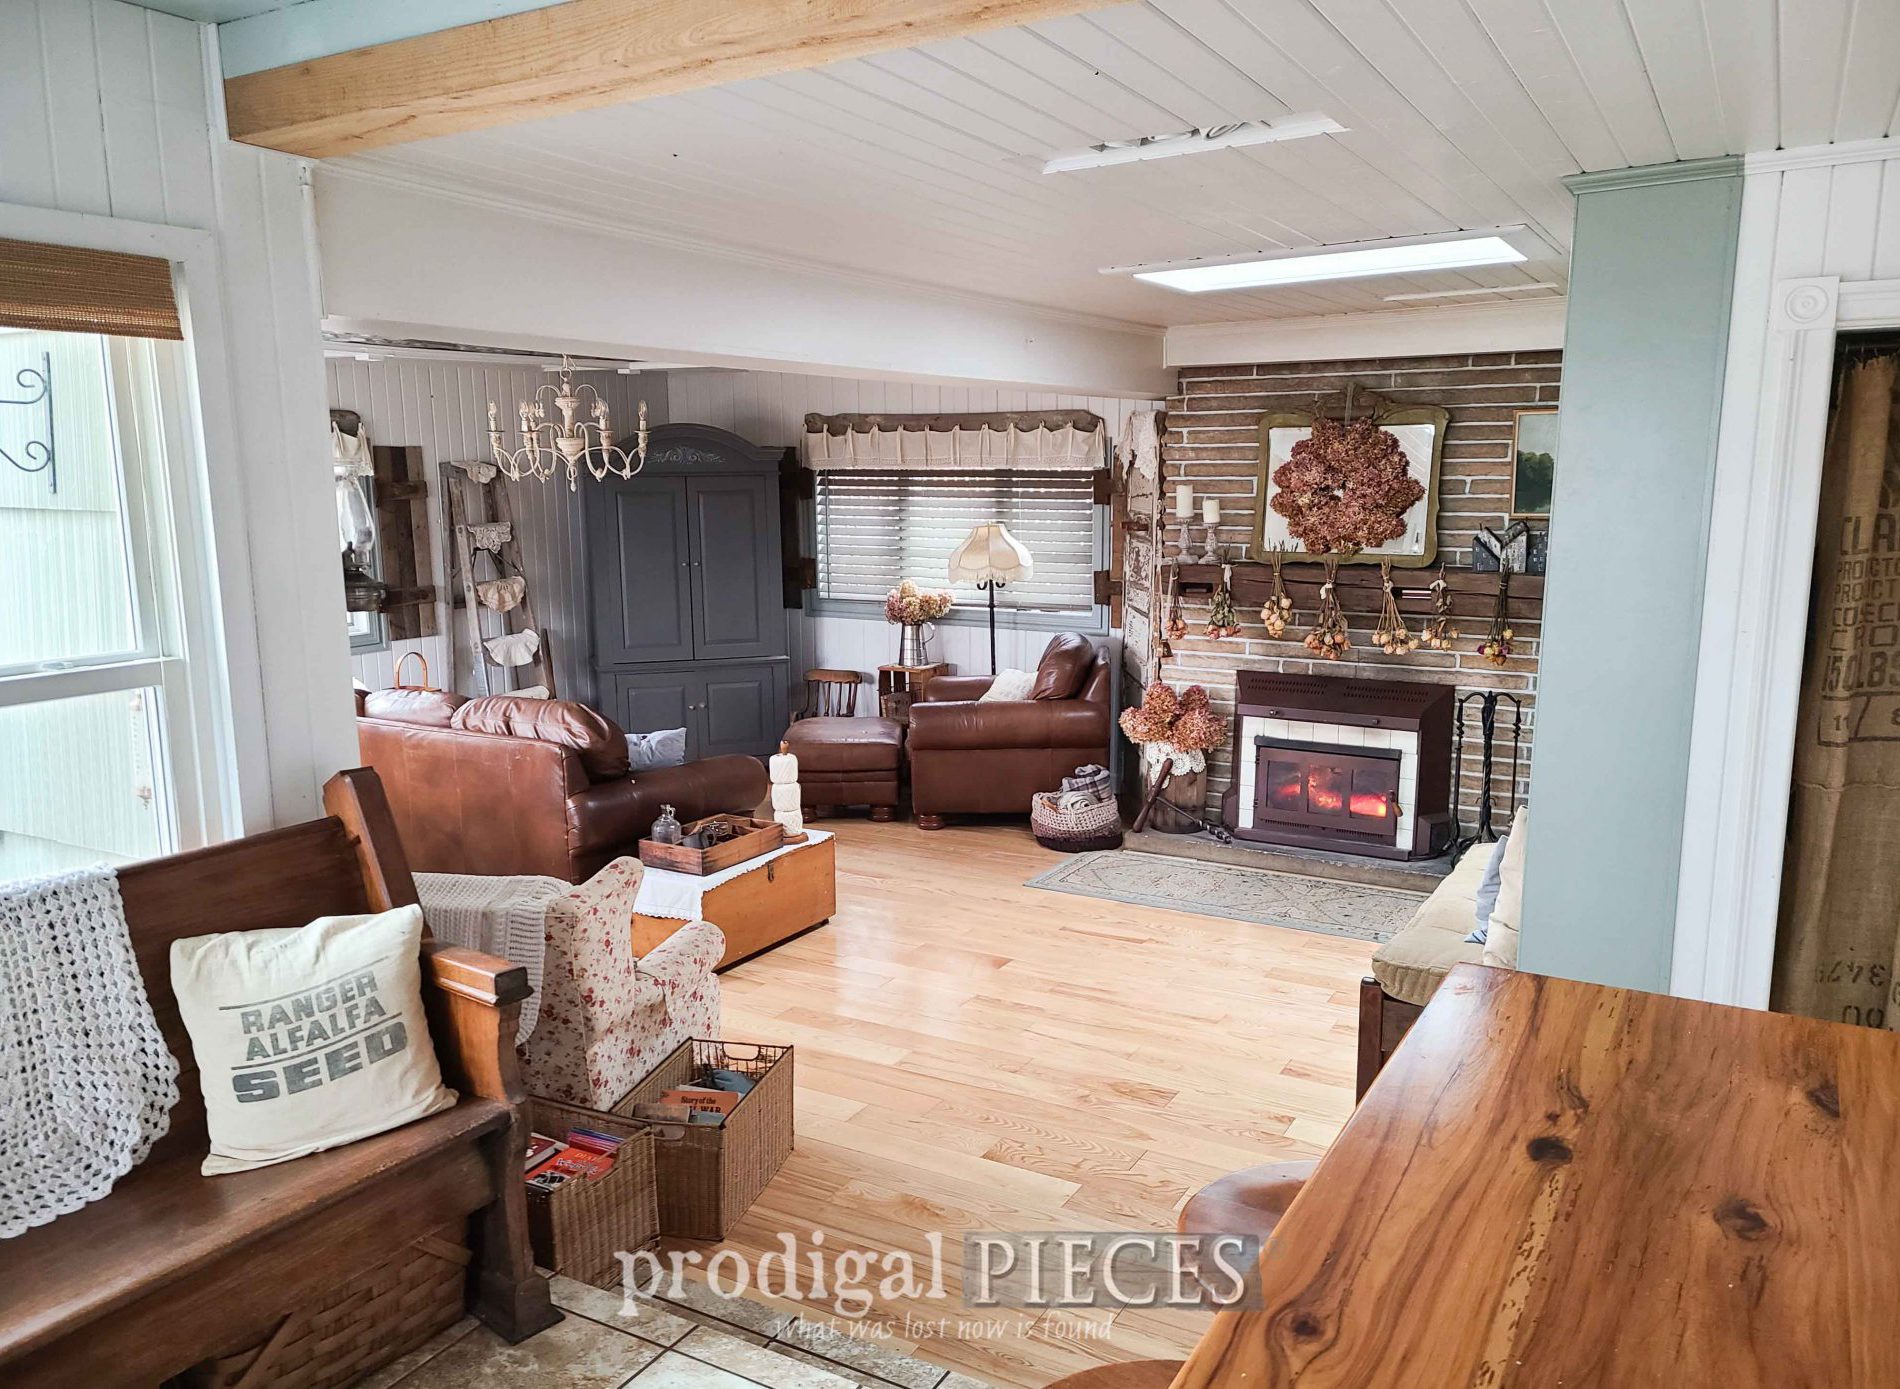 Featured Floating Floor in Farmhouse Family Room Remodel by Larissa of Prodigal Pieces | prodigalpieces.com #prodigalpieces #diy #flooring #home #homedecor